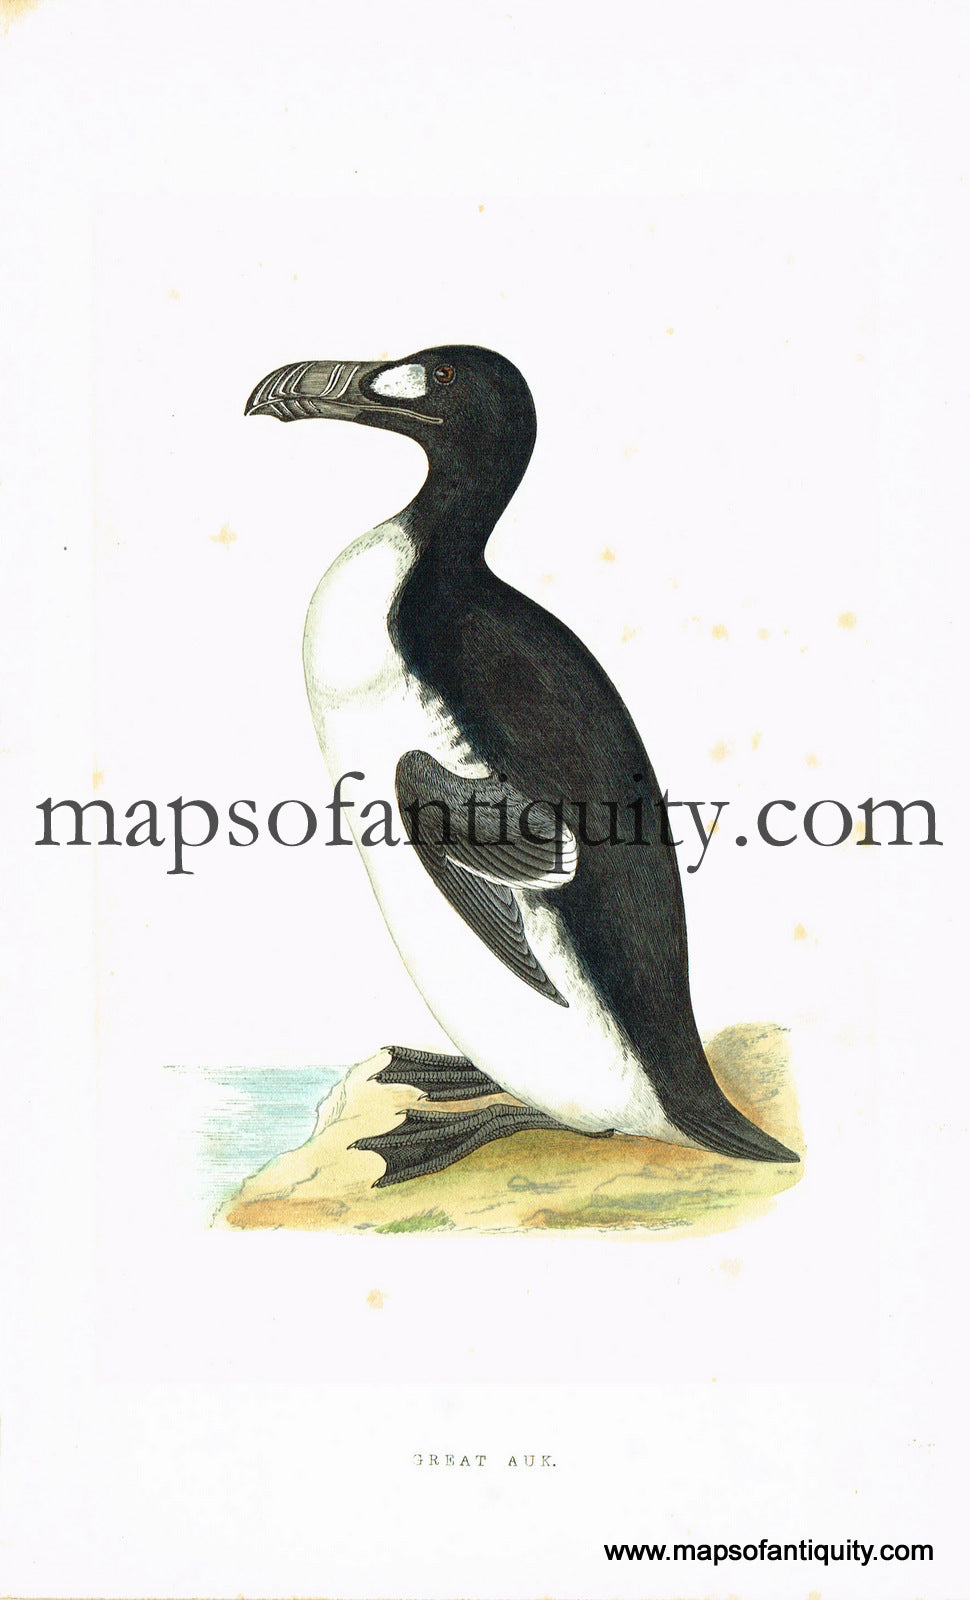 Antique-Hand-Colored-Engraved-Illustration-Great-Auk-Antique-Prints-Natural-History-Birds-c.-1860-Morris-Maps-Of-Antiquity